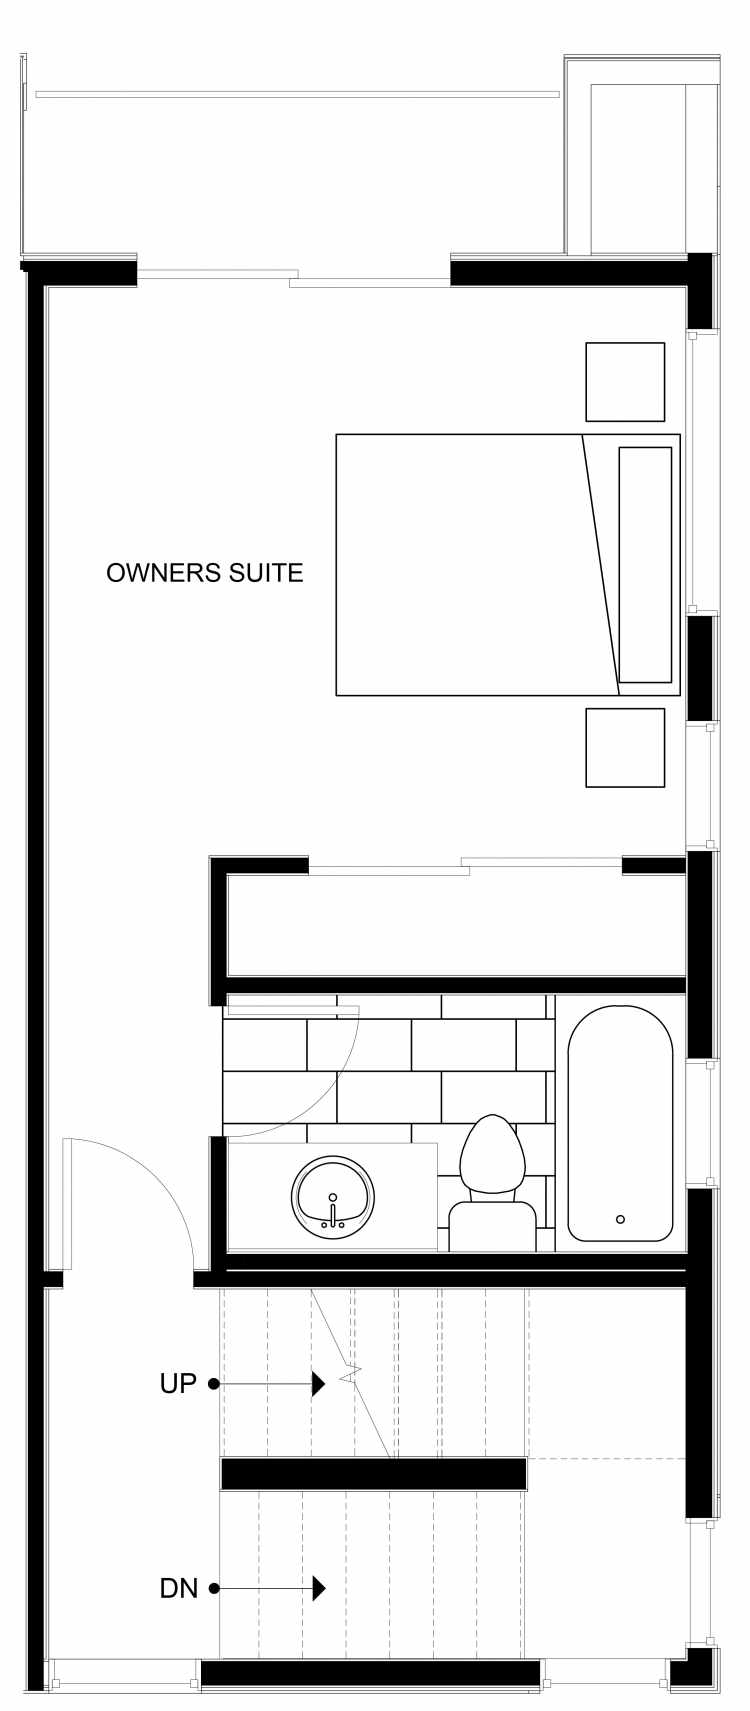 Fourth Floor Plan of 1539 Grandview Pl E, One of the Larrabee Townhomes in Capitol Hill